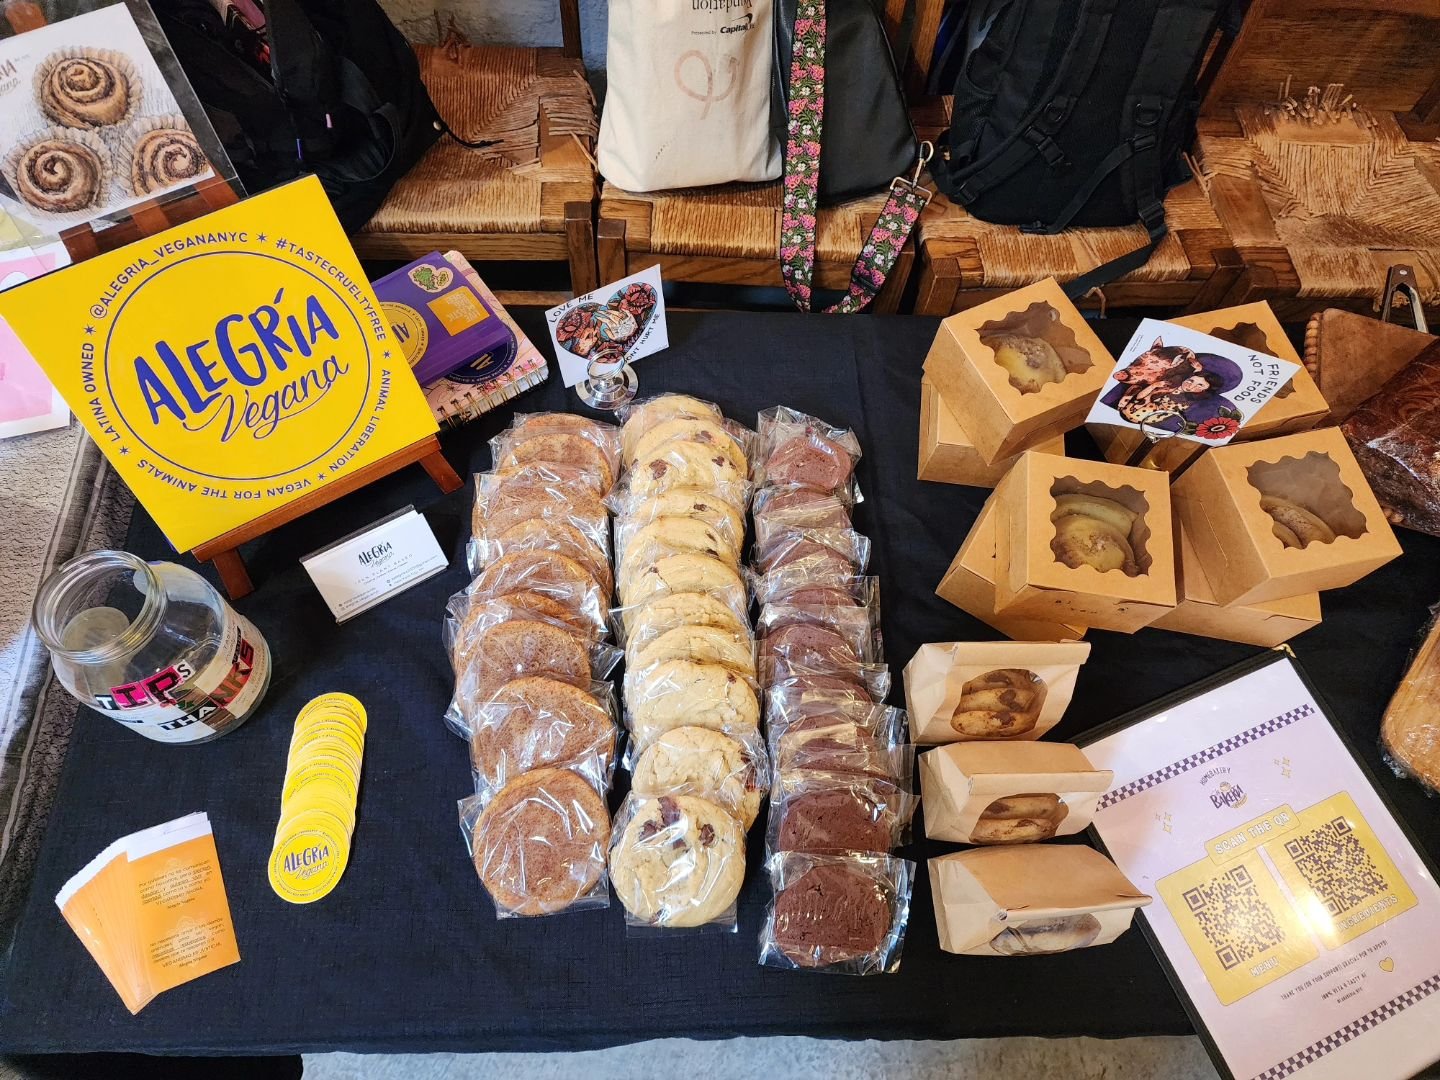 Right now, at @principlesbk on #gowanus #brooklyn

#Colombian &amp; #Vegan #Bakery

●Cinnamon rolls
●Cardamom &amp; almond rolls
●Chocolate chip cookies
●Snickerdoodle
●Marbled banana bread
●Pan de caja w/ sesame seeds

Happy to be here and share som